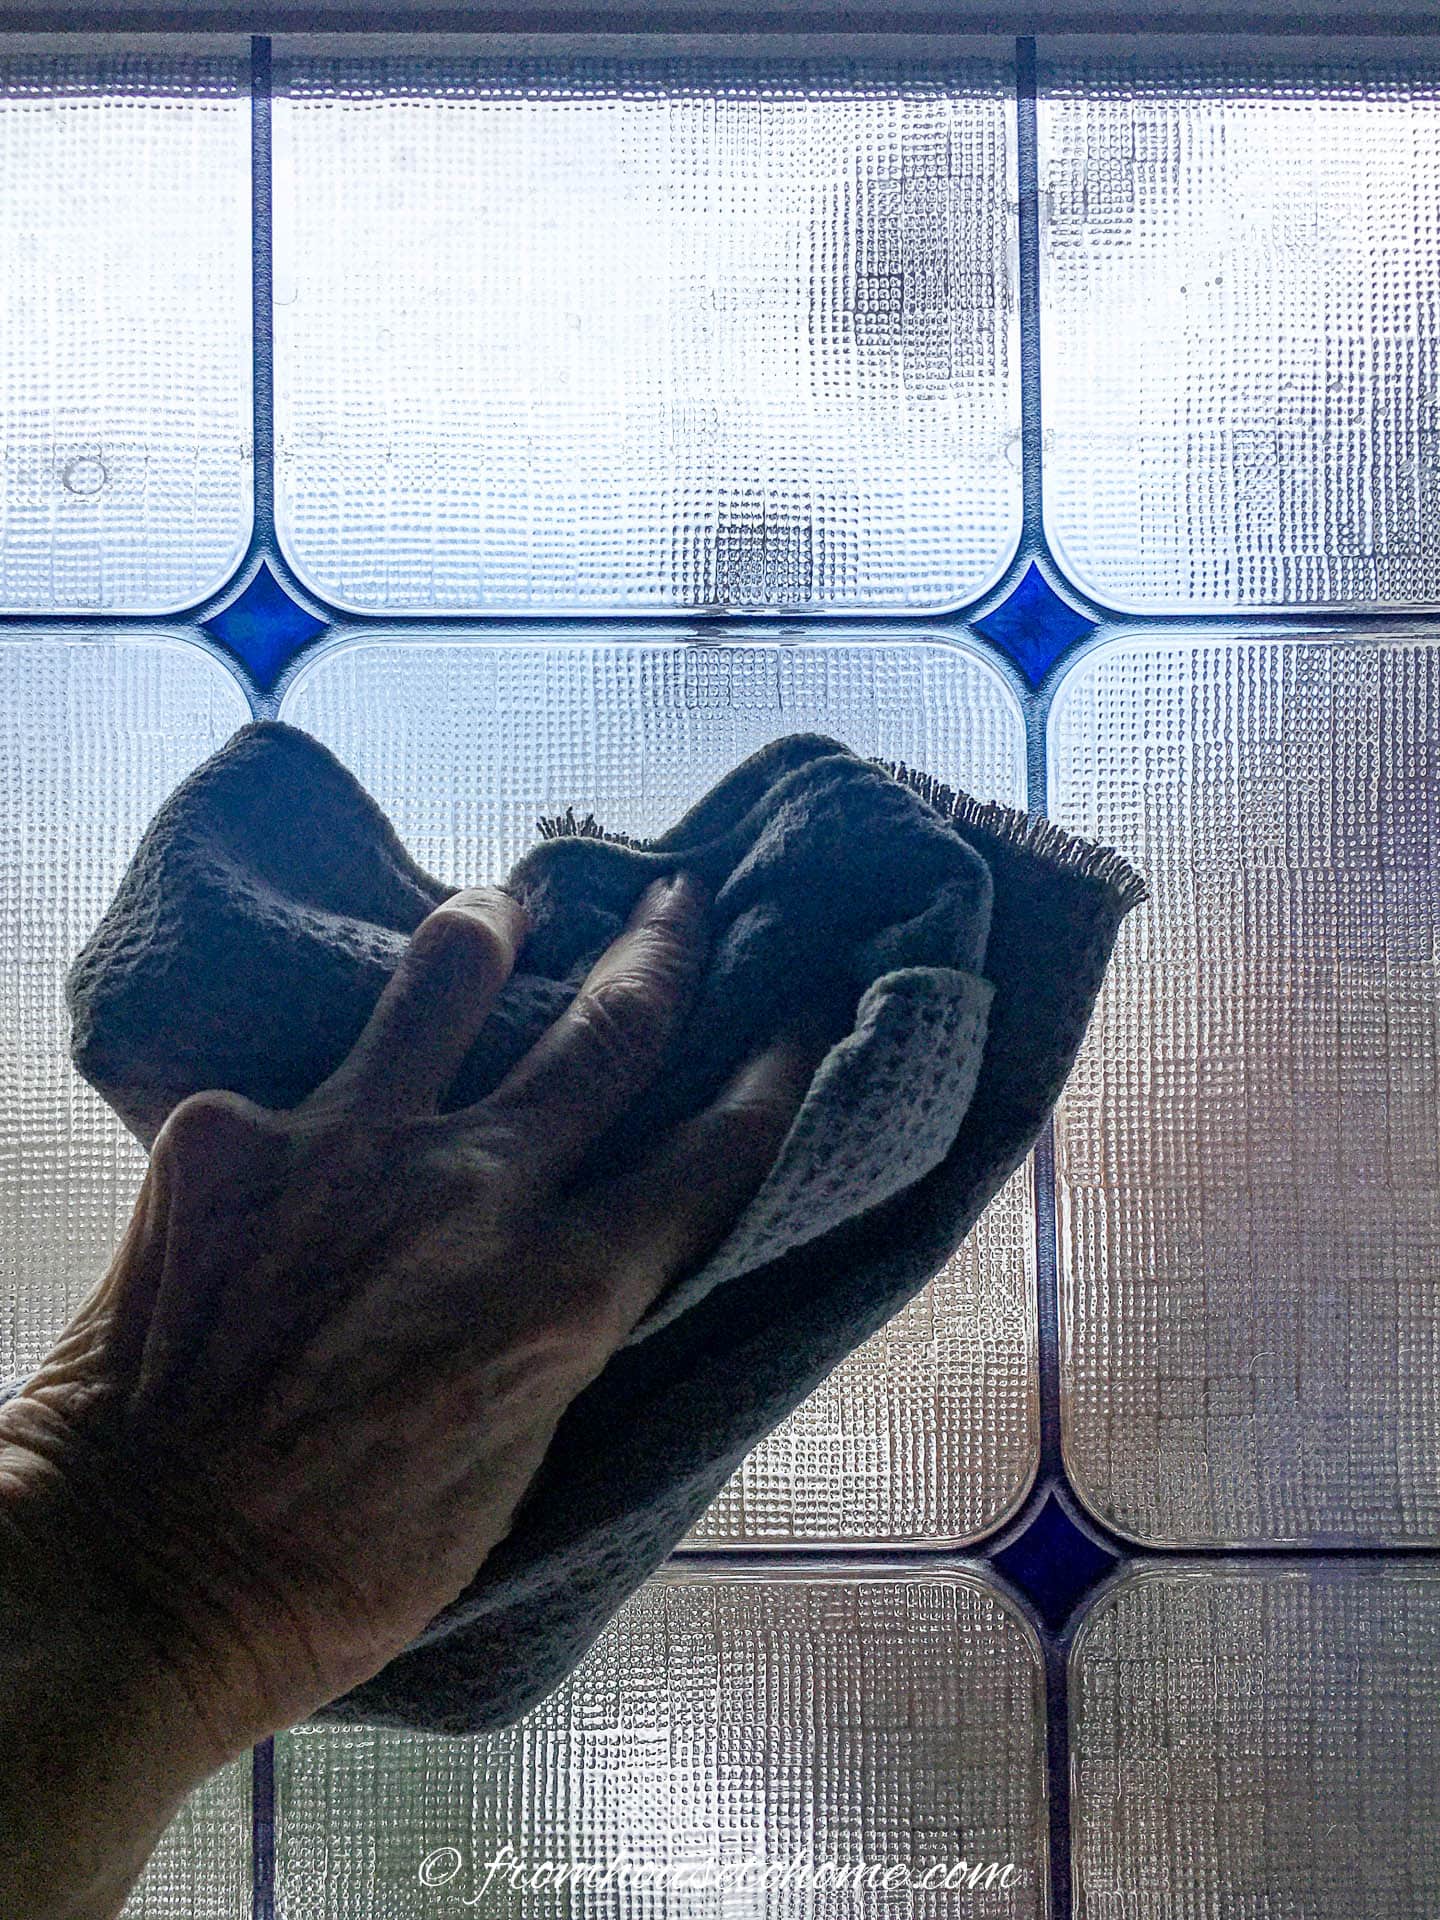 A wash cloth wiping the window film after it has been cleaned